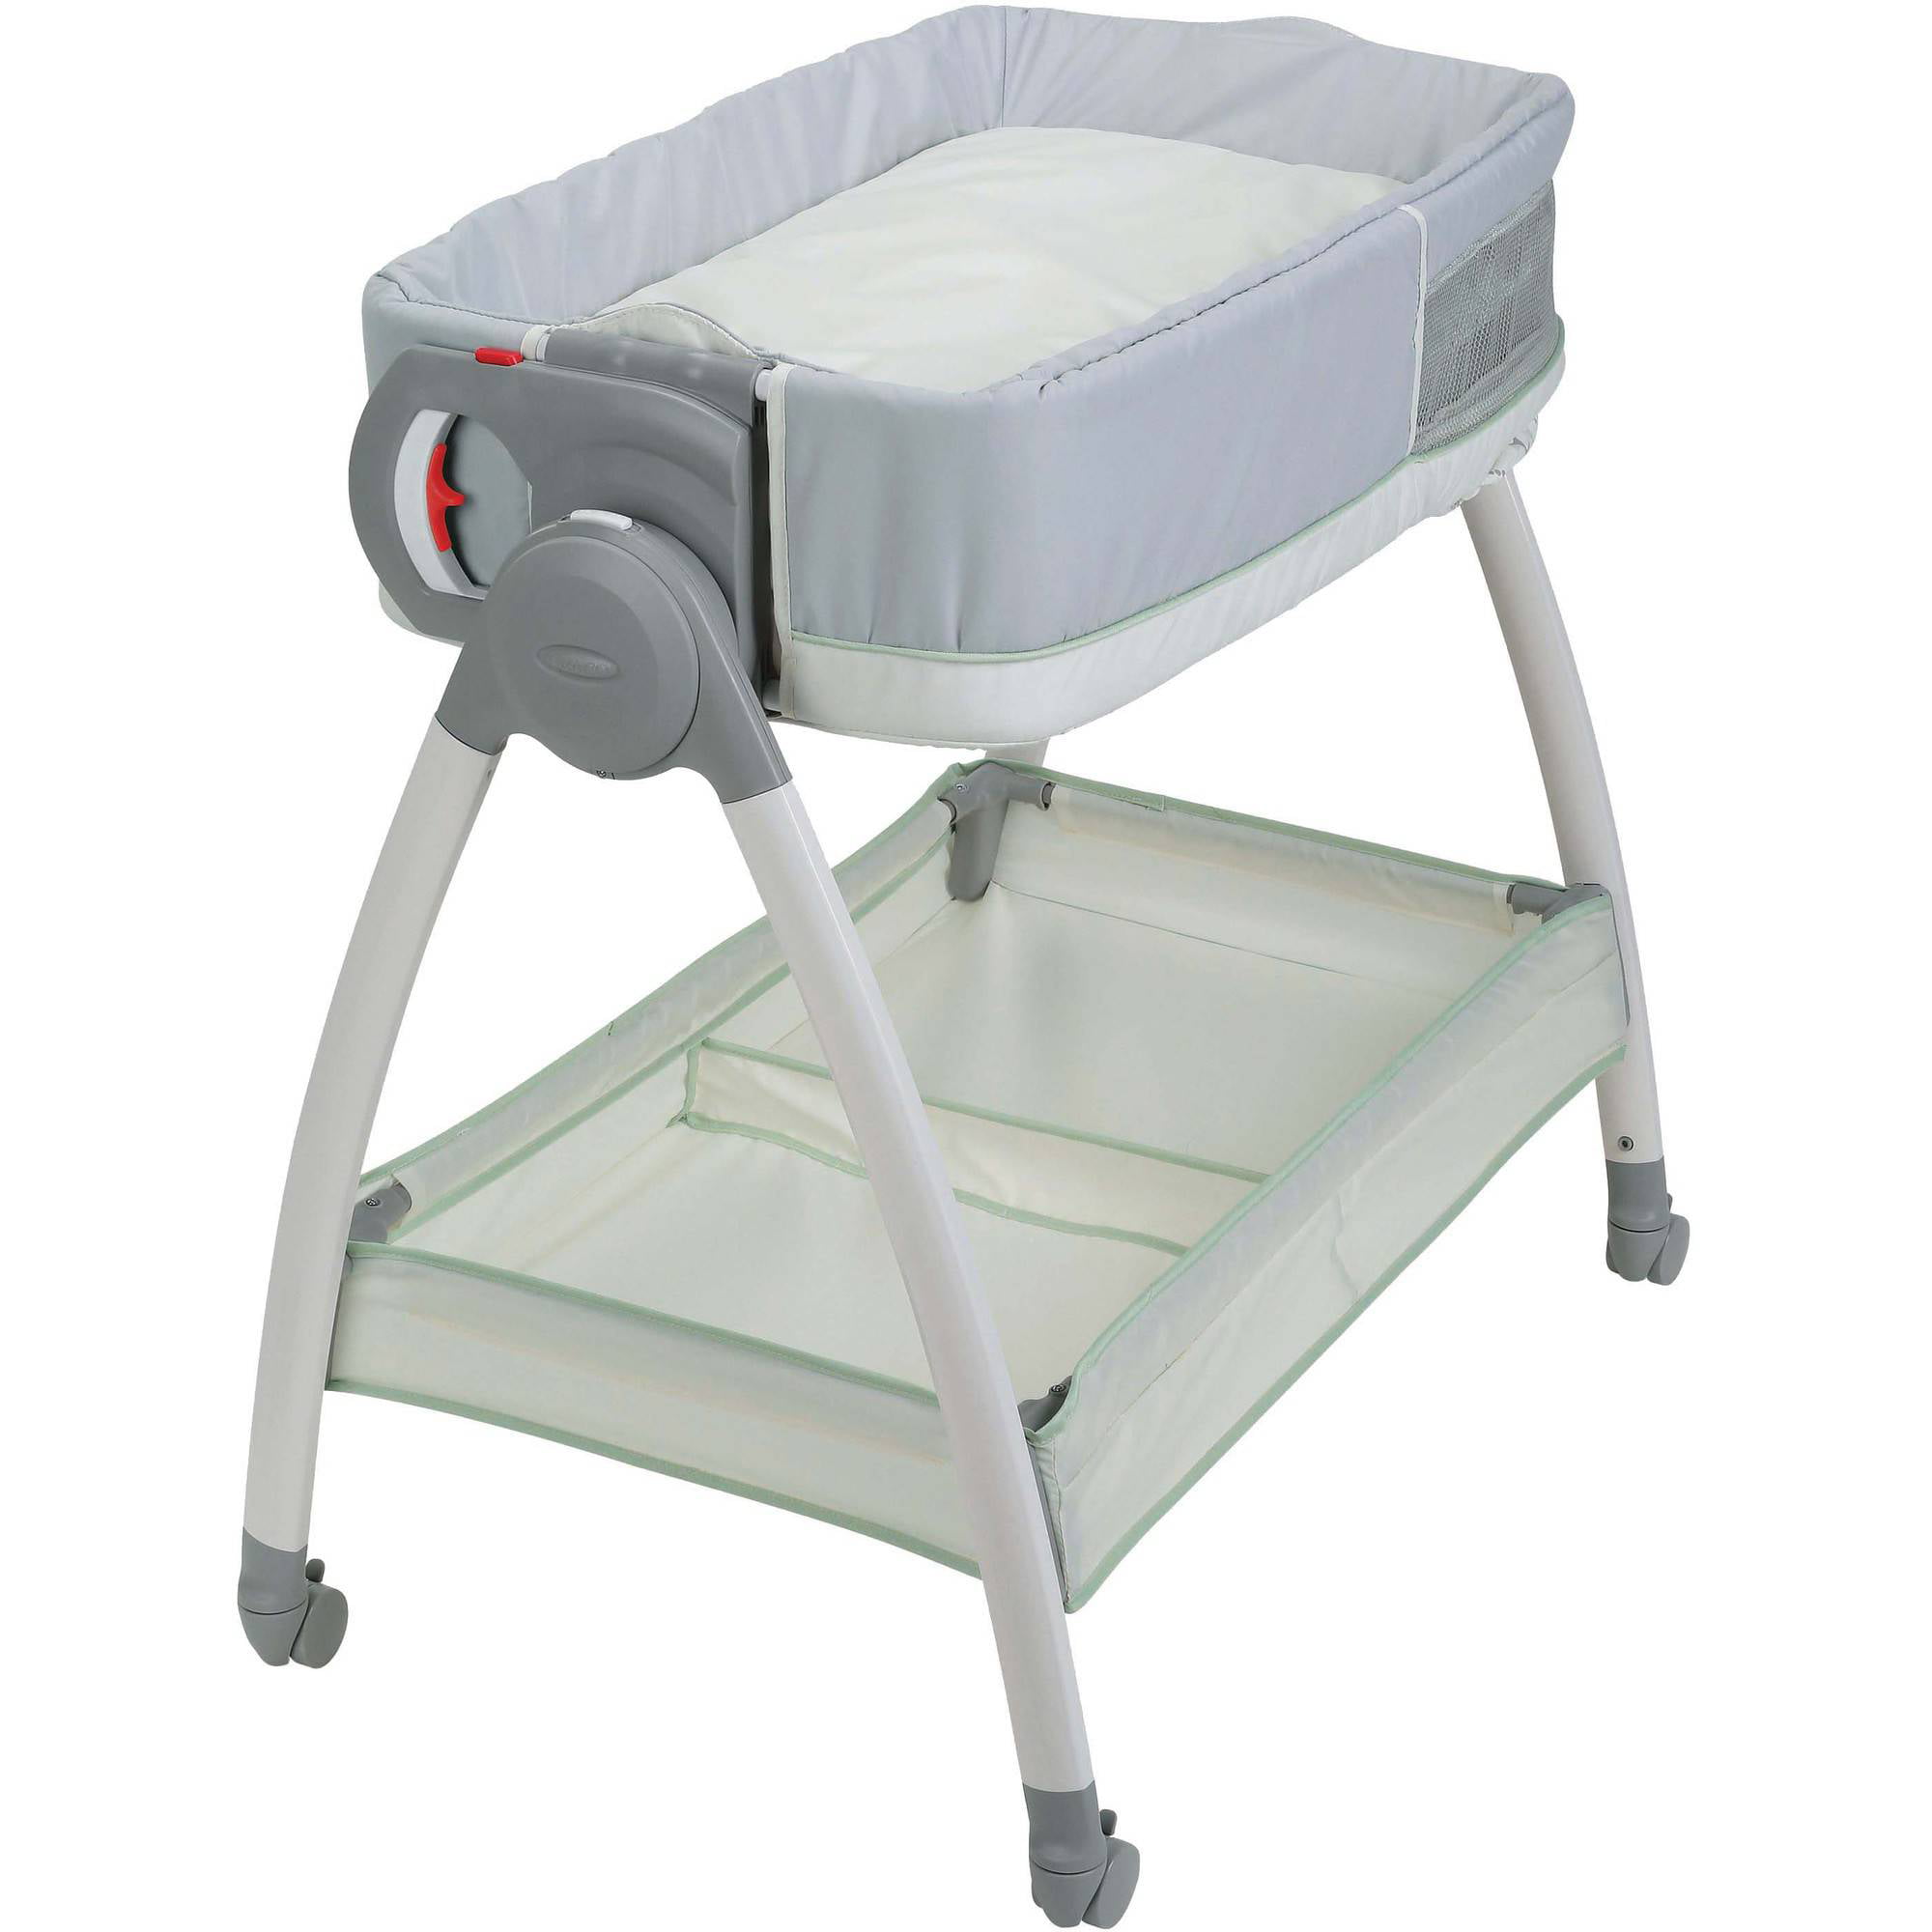 bassinet and changer